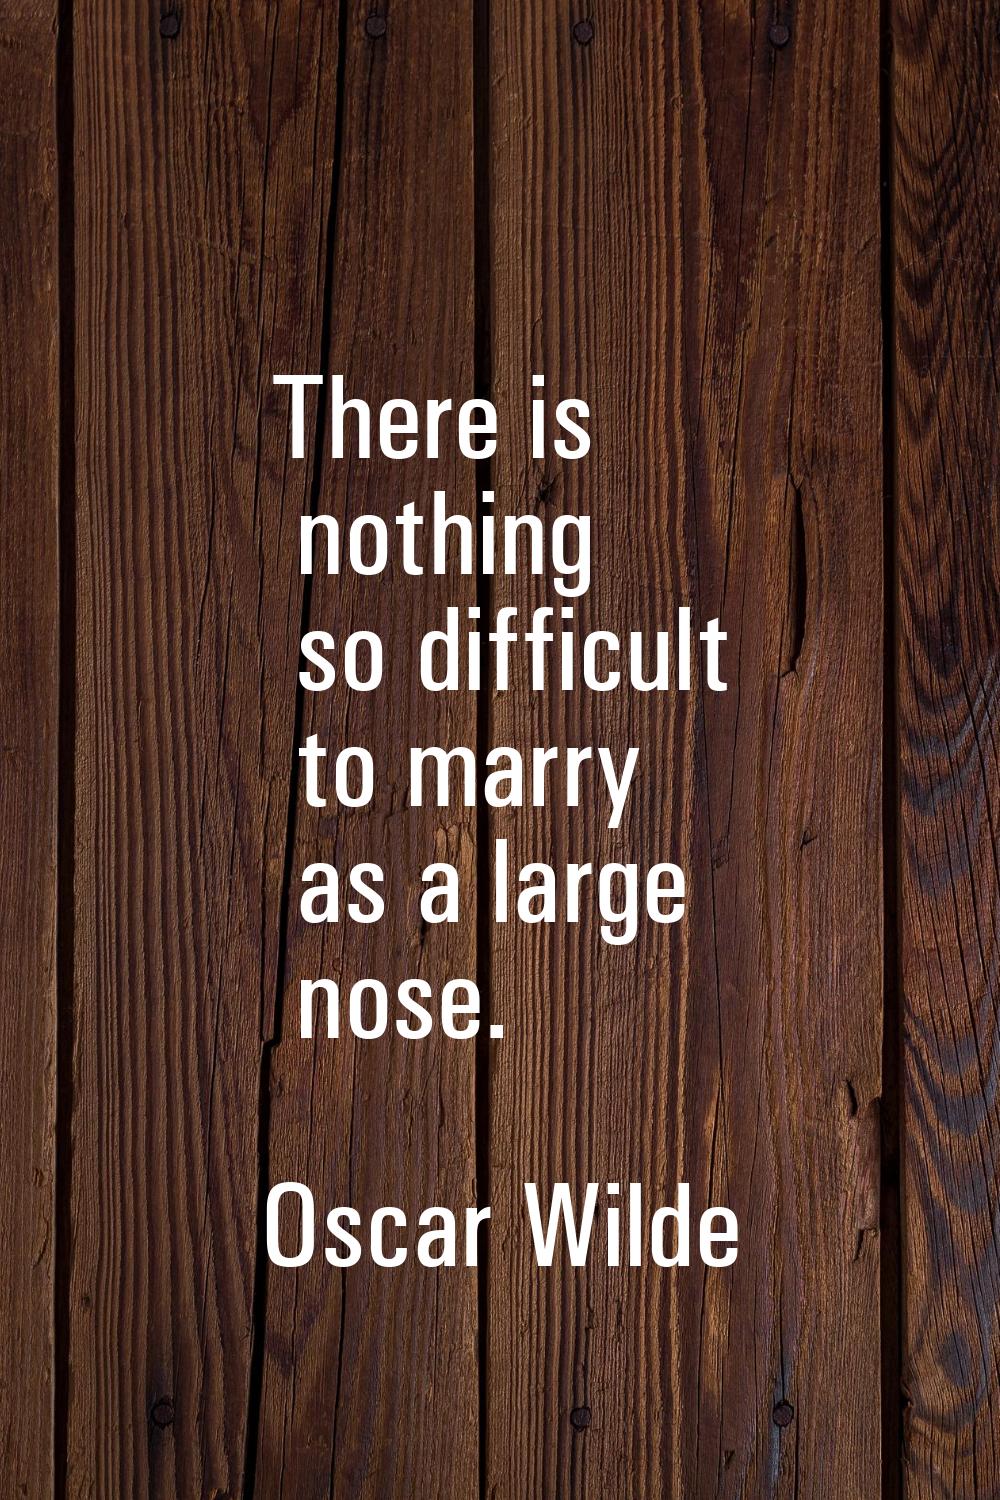 There is nothing so difficult to marry as a large nose.